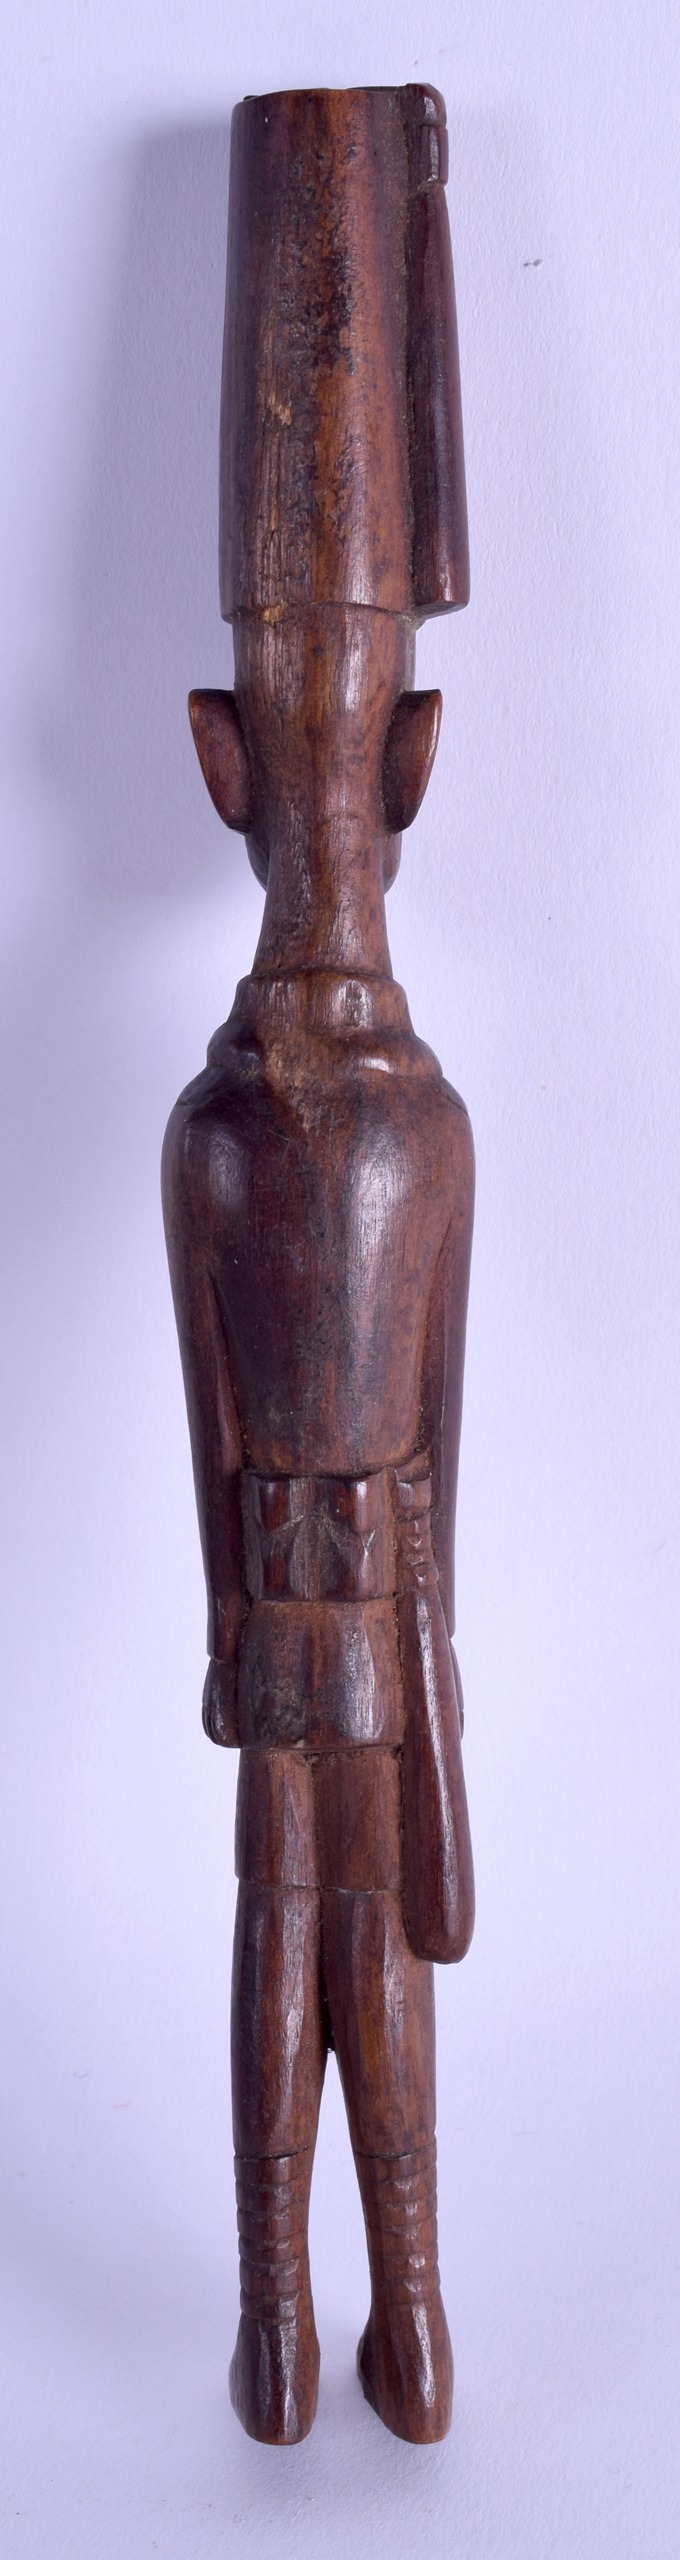 AN UNUSUAL EARLY 20TH CENTURY AFRICAN CARVED WOOD FIGURE OF MALE possibly representing a police - Image 2 of 2